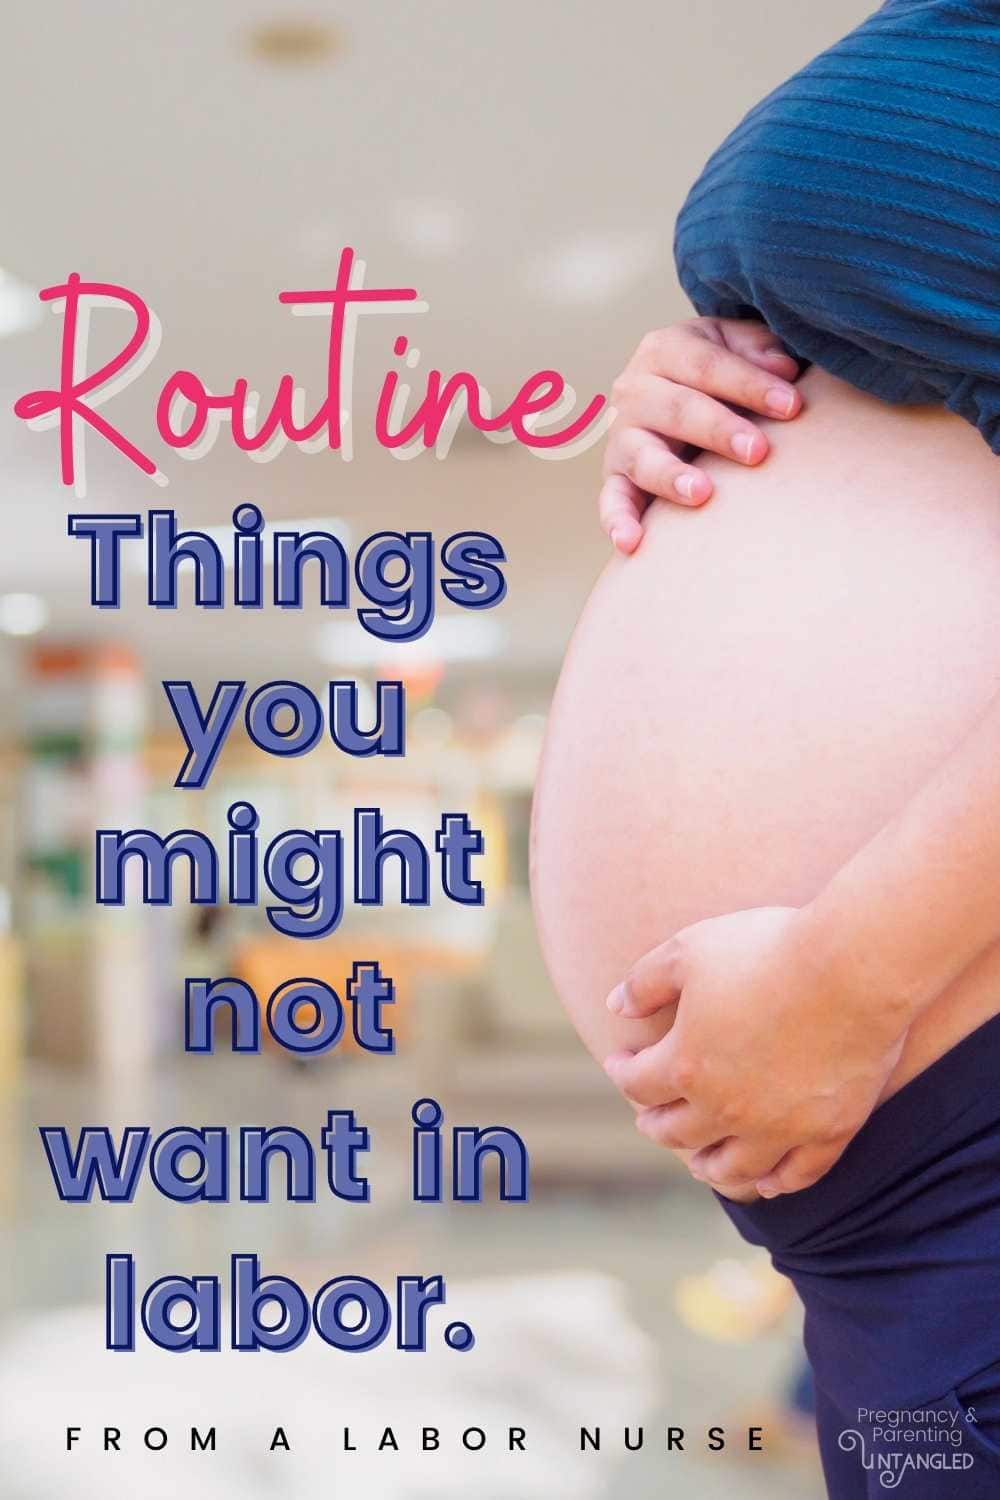 There are a lot of routine things that we normally just do unless you'd rather do something else. That doesn't mean you can't refuse them. It means you just need to know why we normally do them, and why you're making another choice. via @pullingcurls